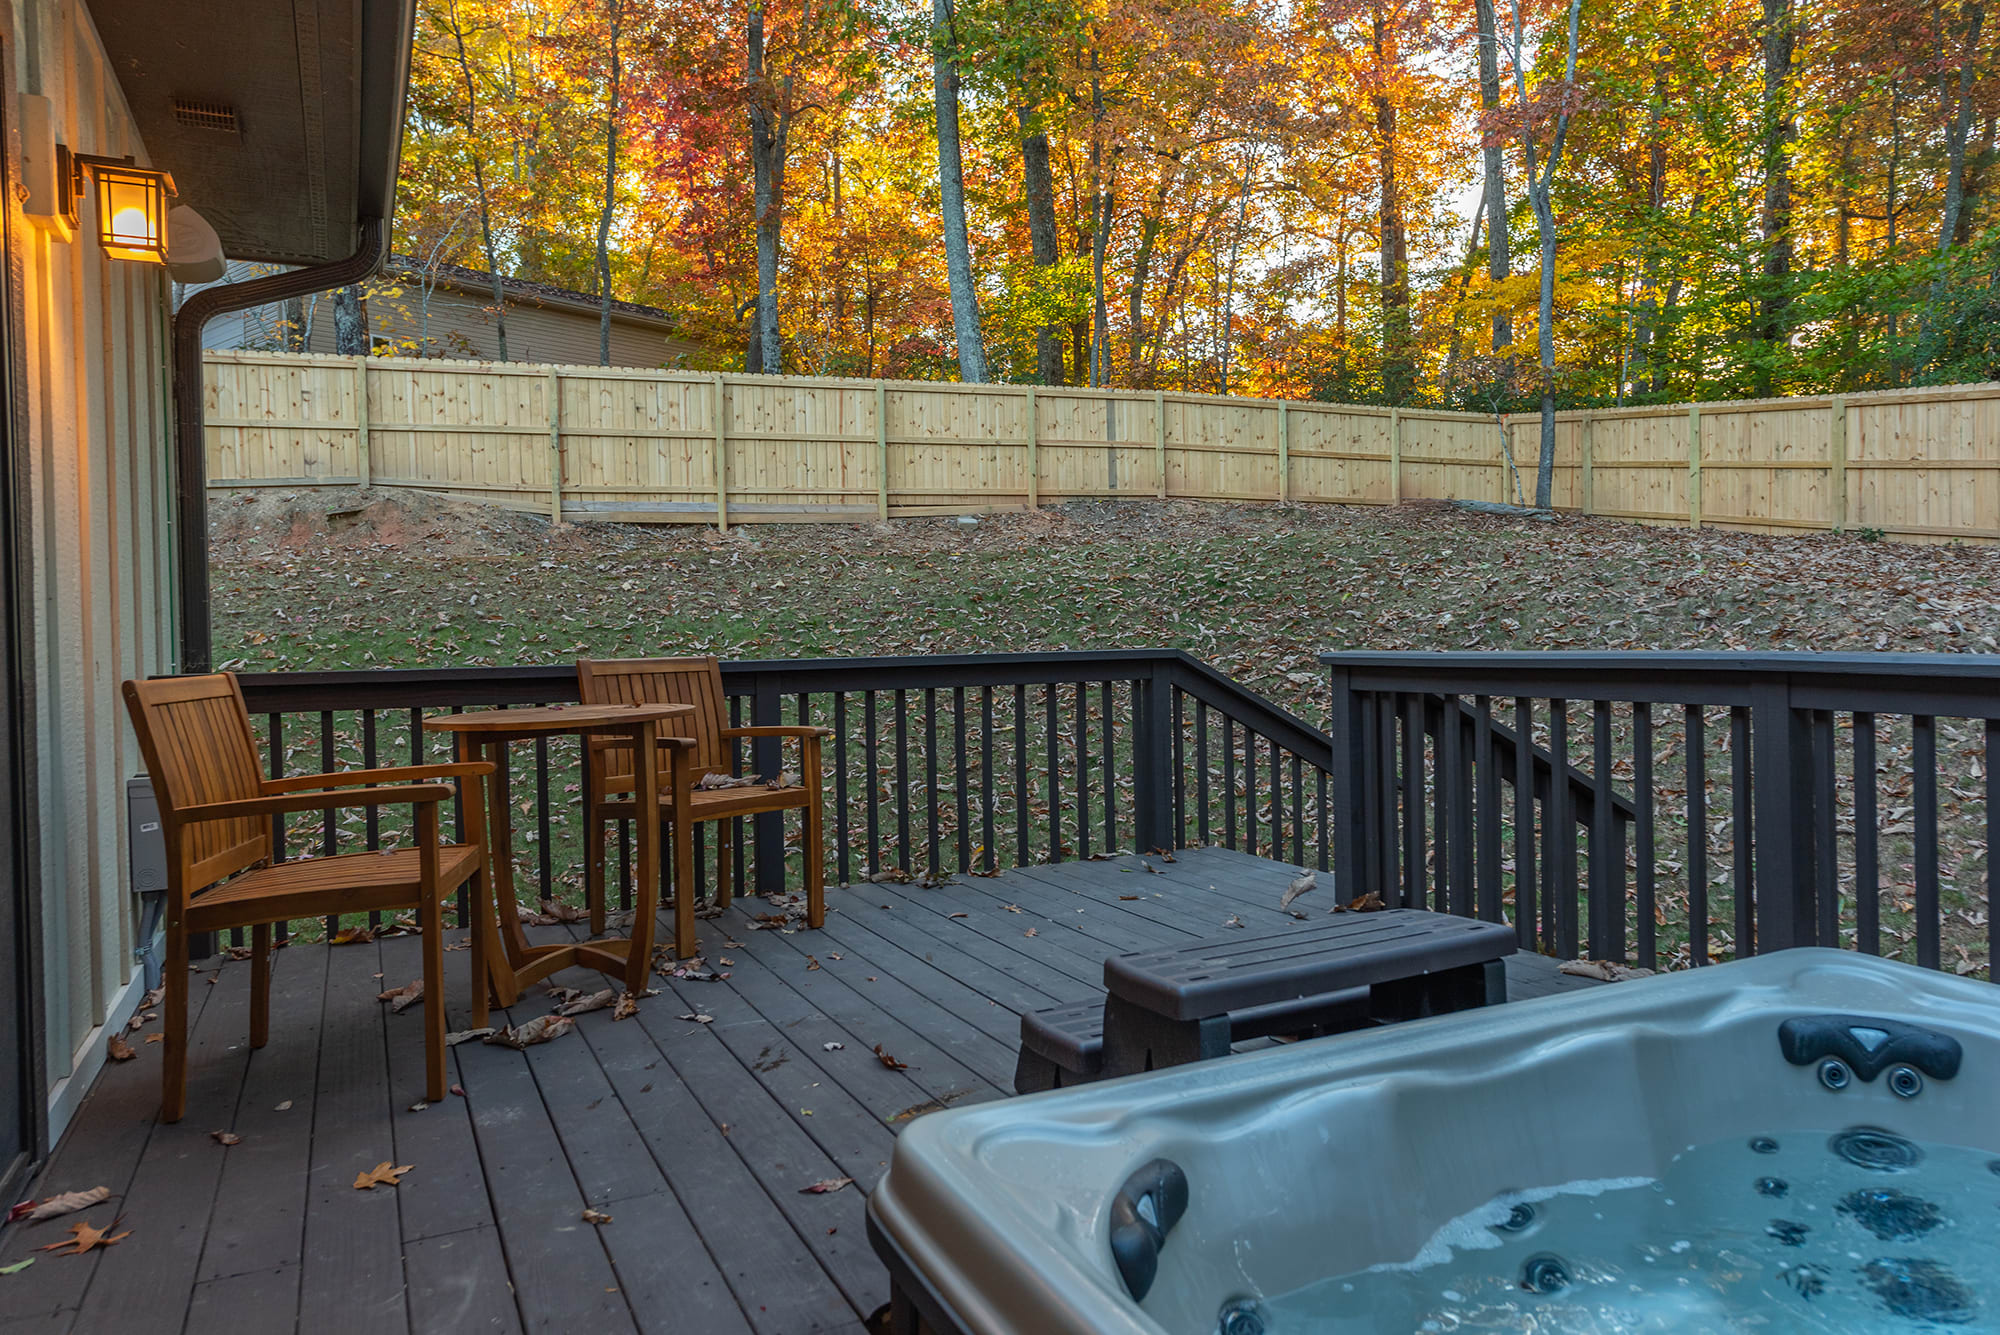 Relax in the hot tub with a fully fenced in yard!